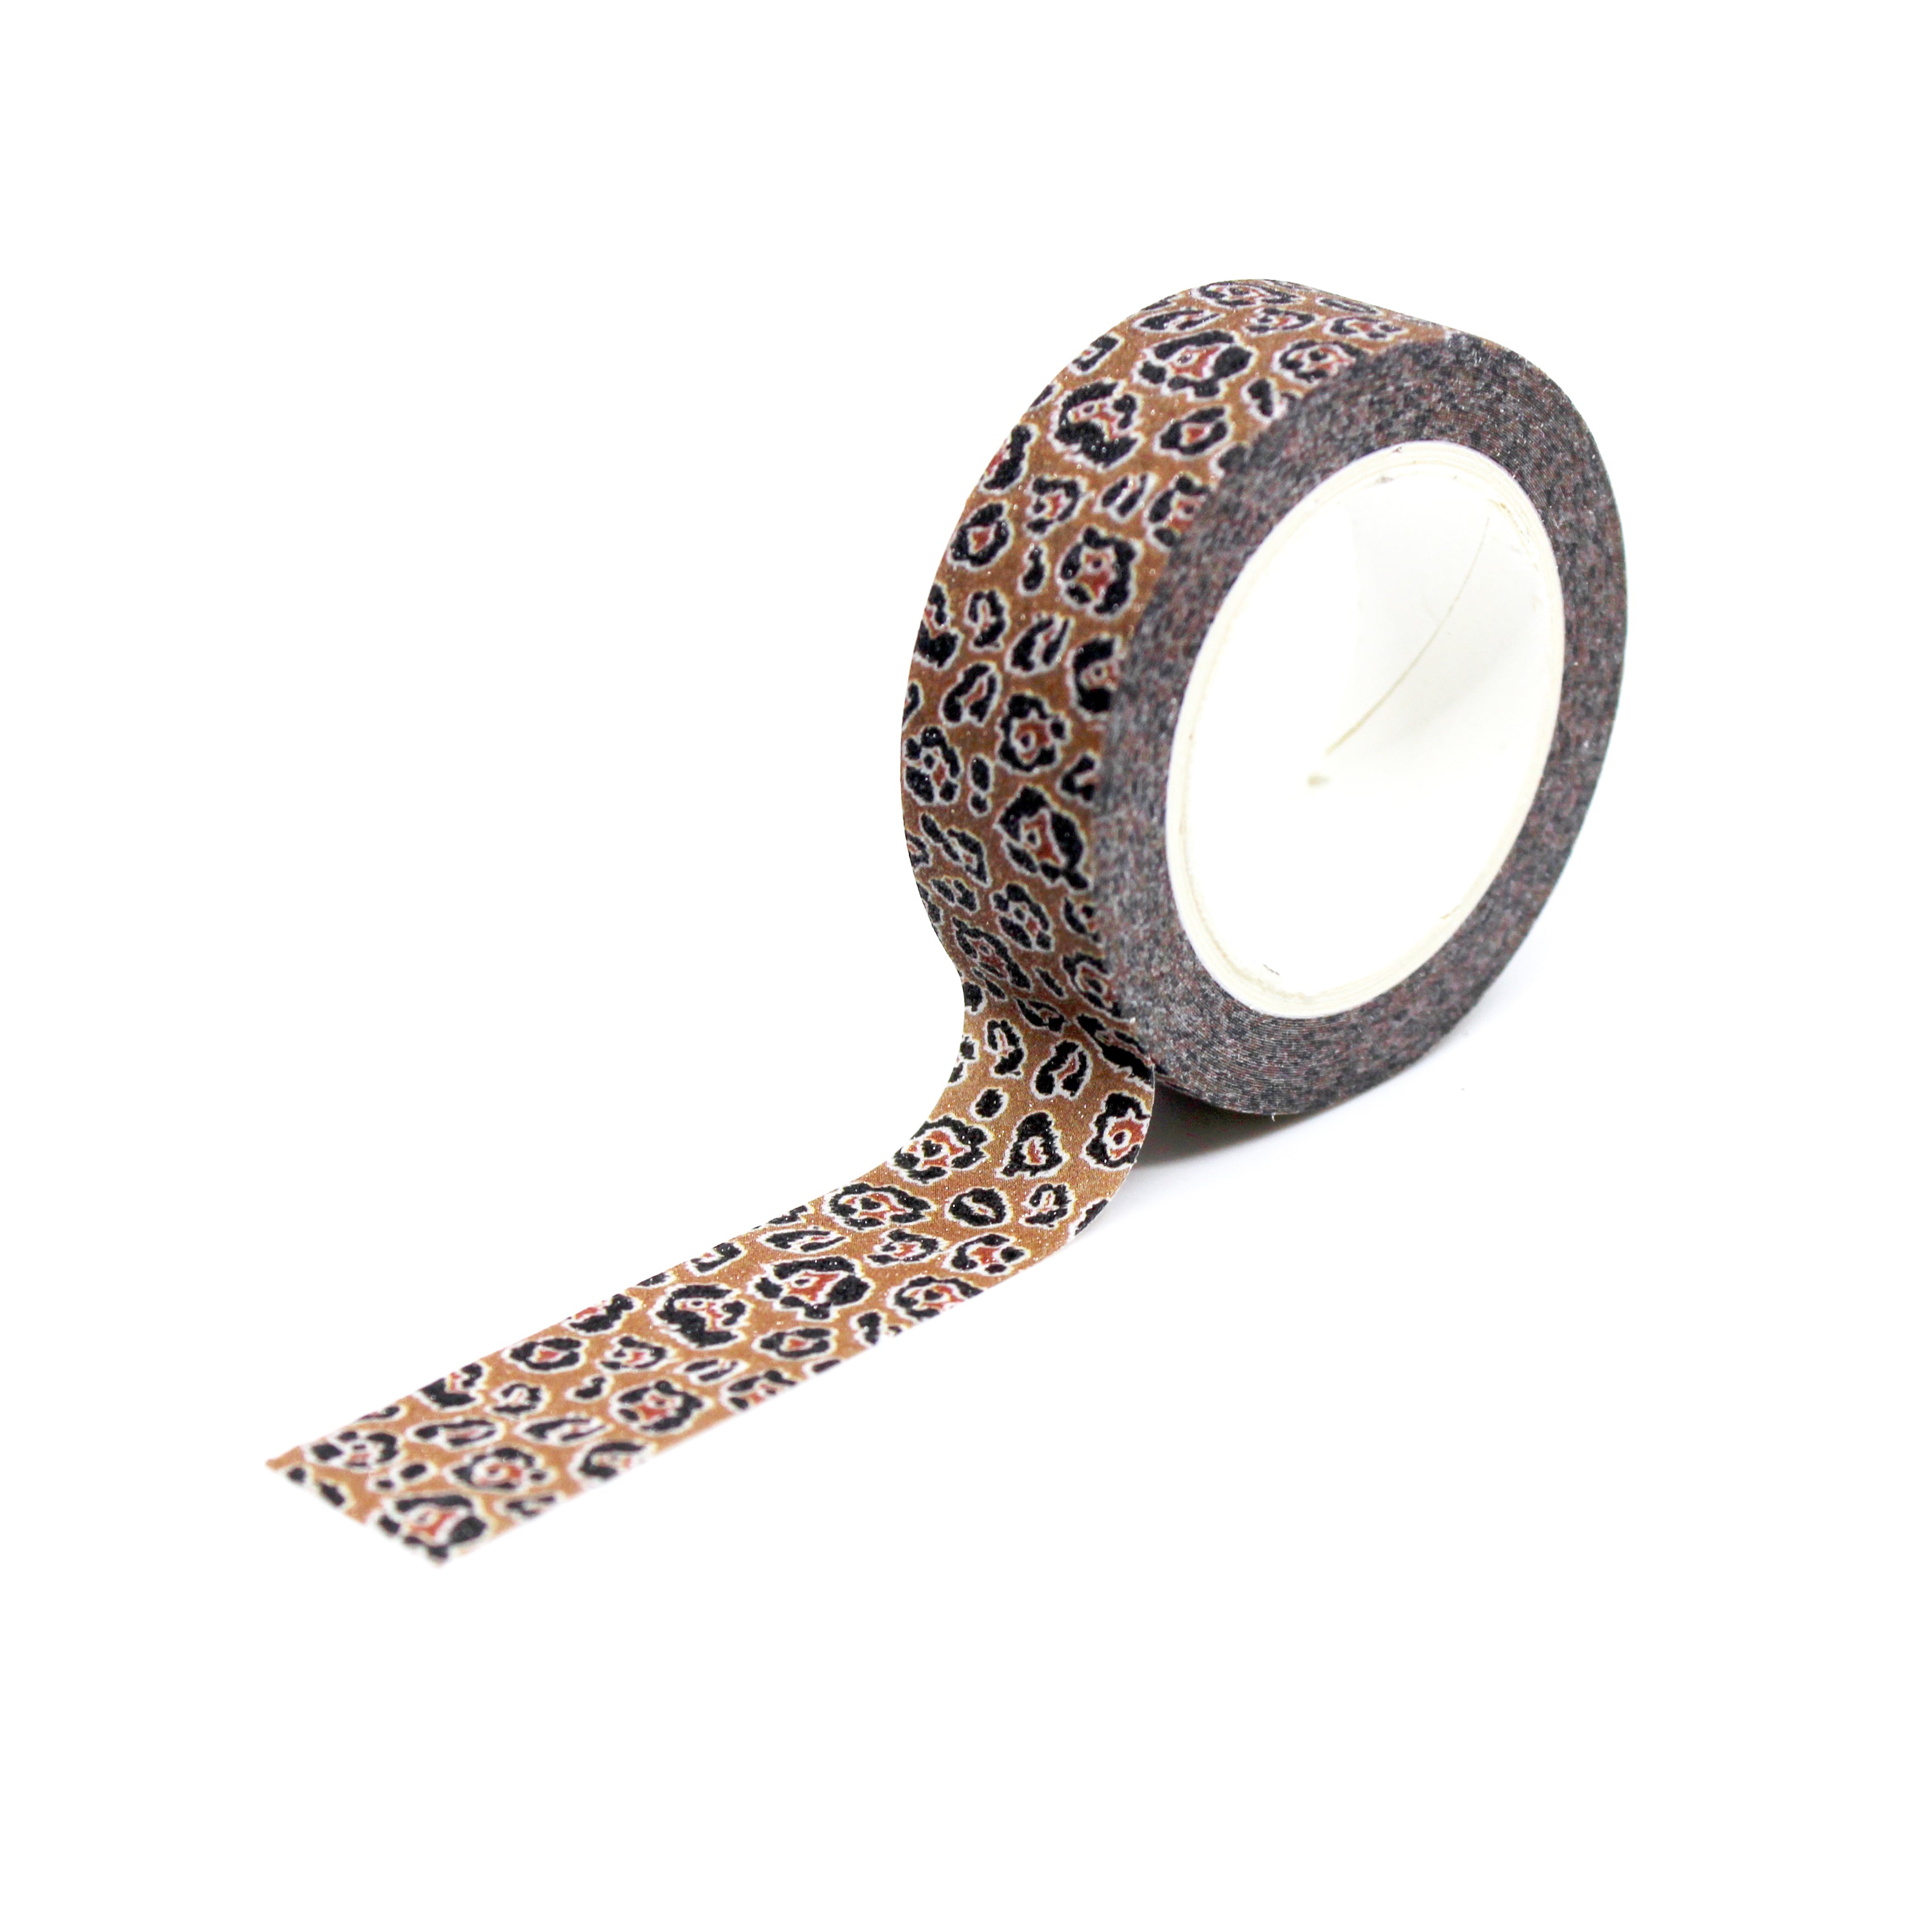 This is a full pattern repeat view of brownish leopard skin style washi tape from BBB Supplies Craft Shop